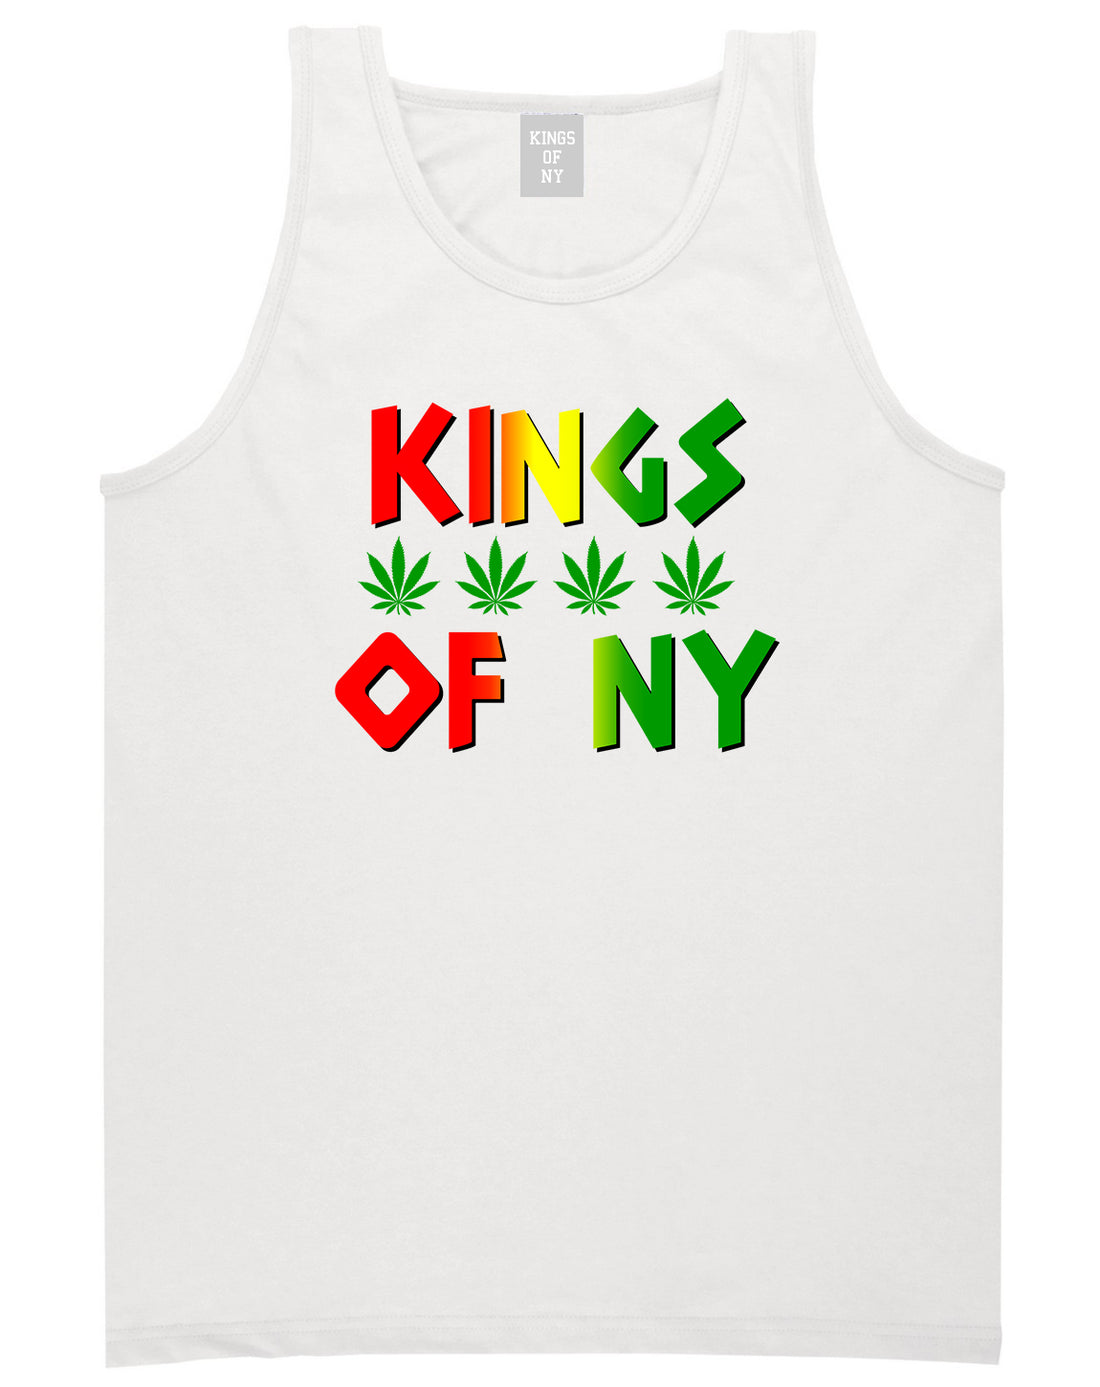 Puff Puff Pass Mens Tank Top Shirt White by Kings Of NY